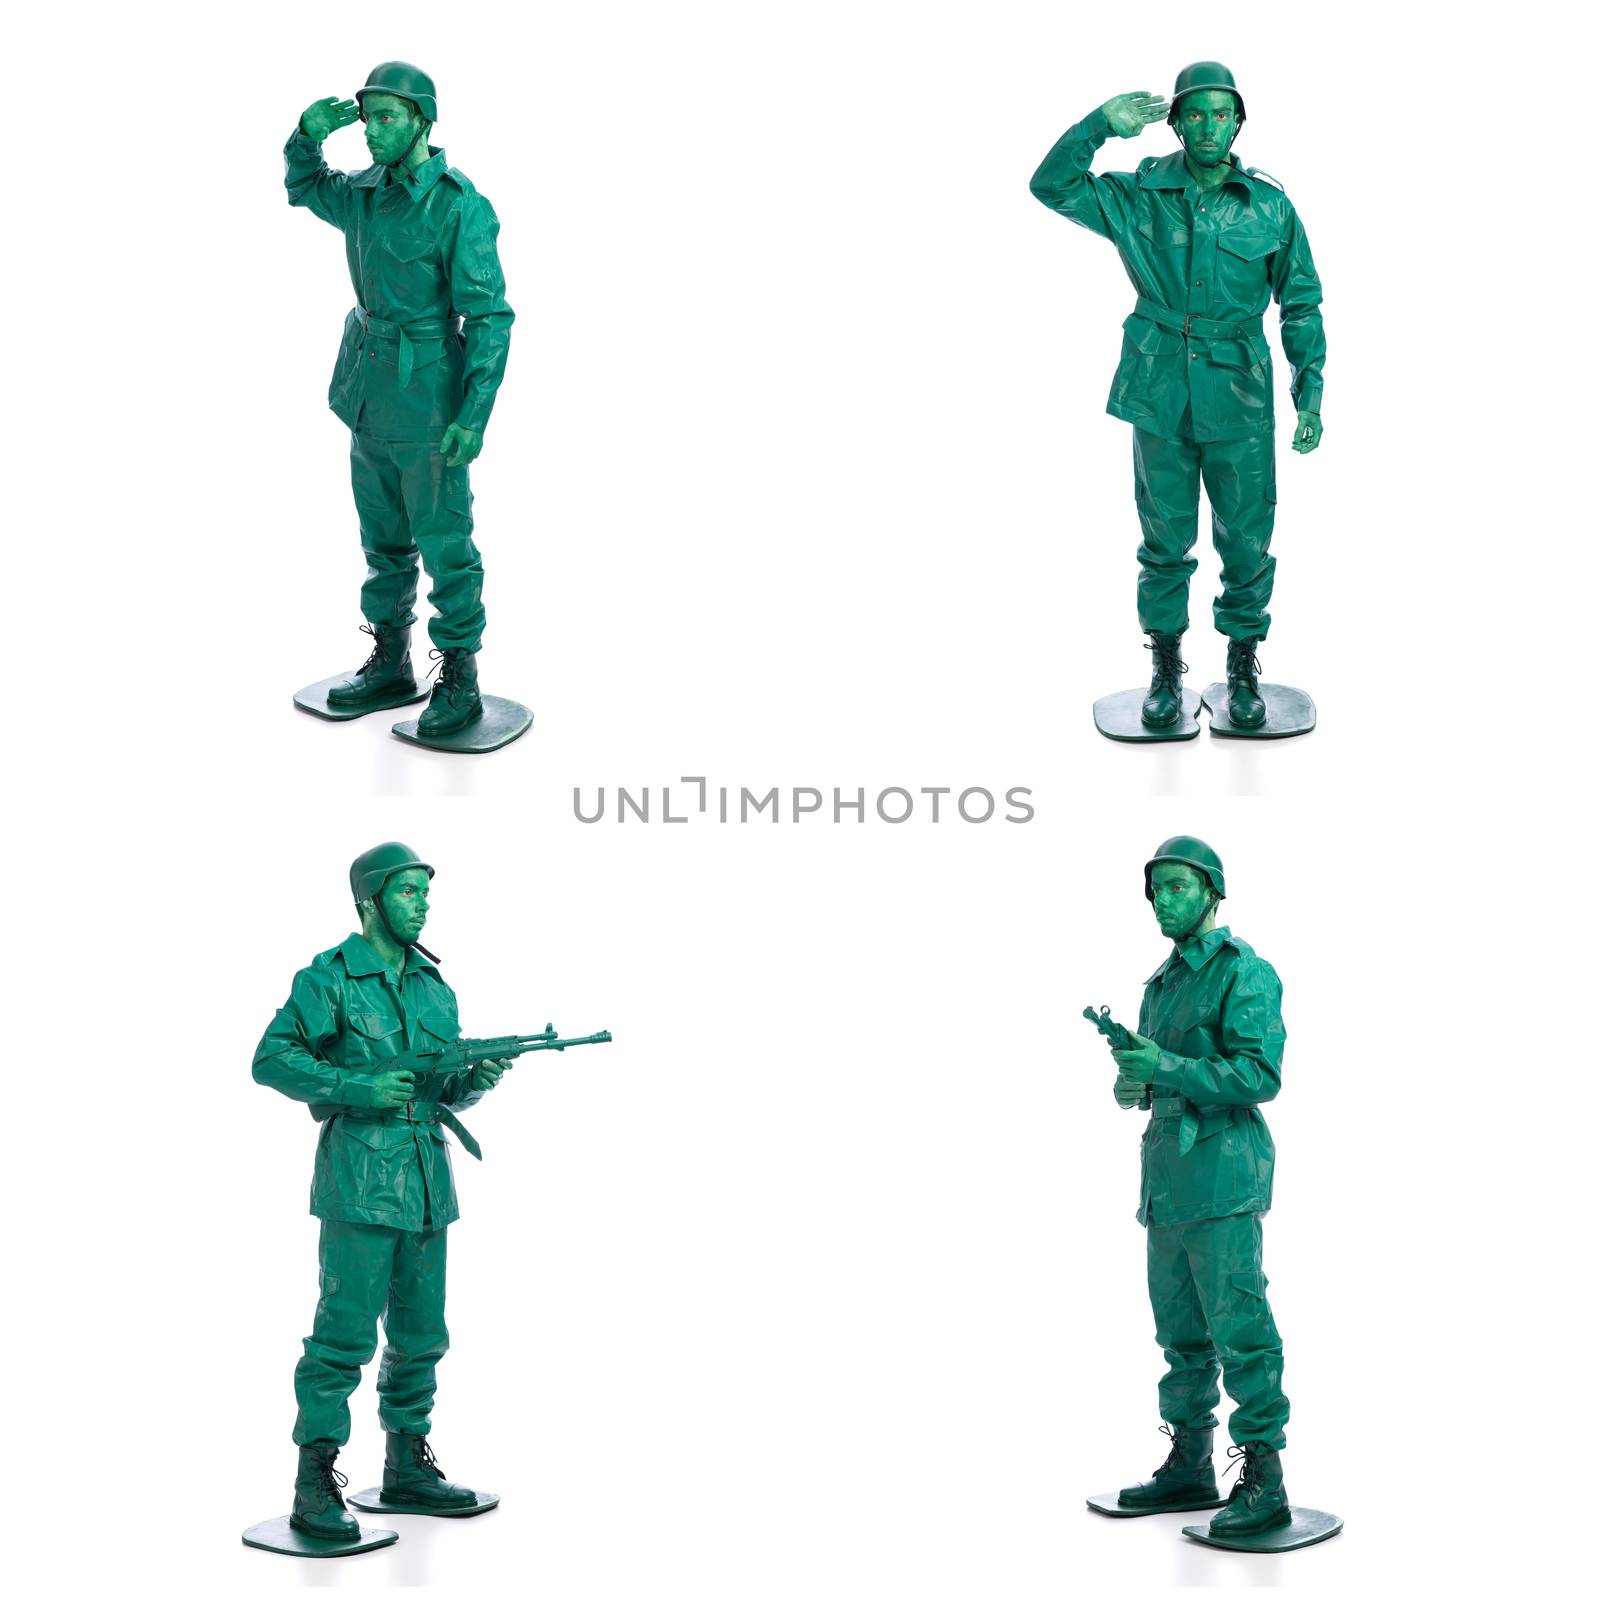 Four man on a green toy soldier costume by homydesign